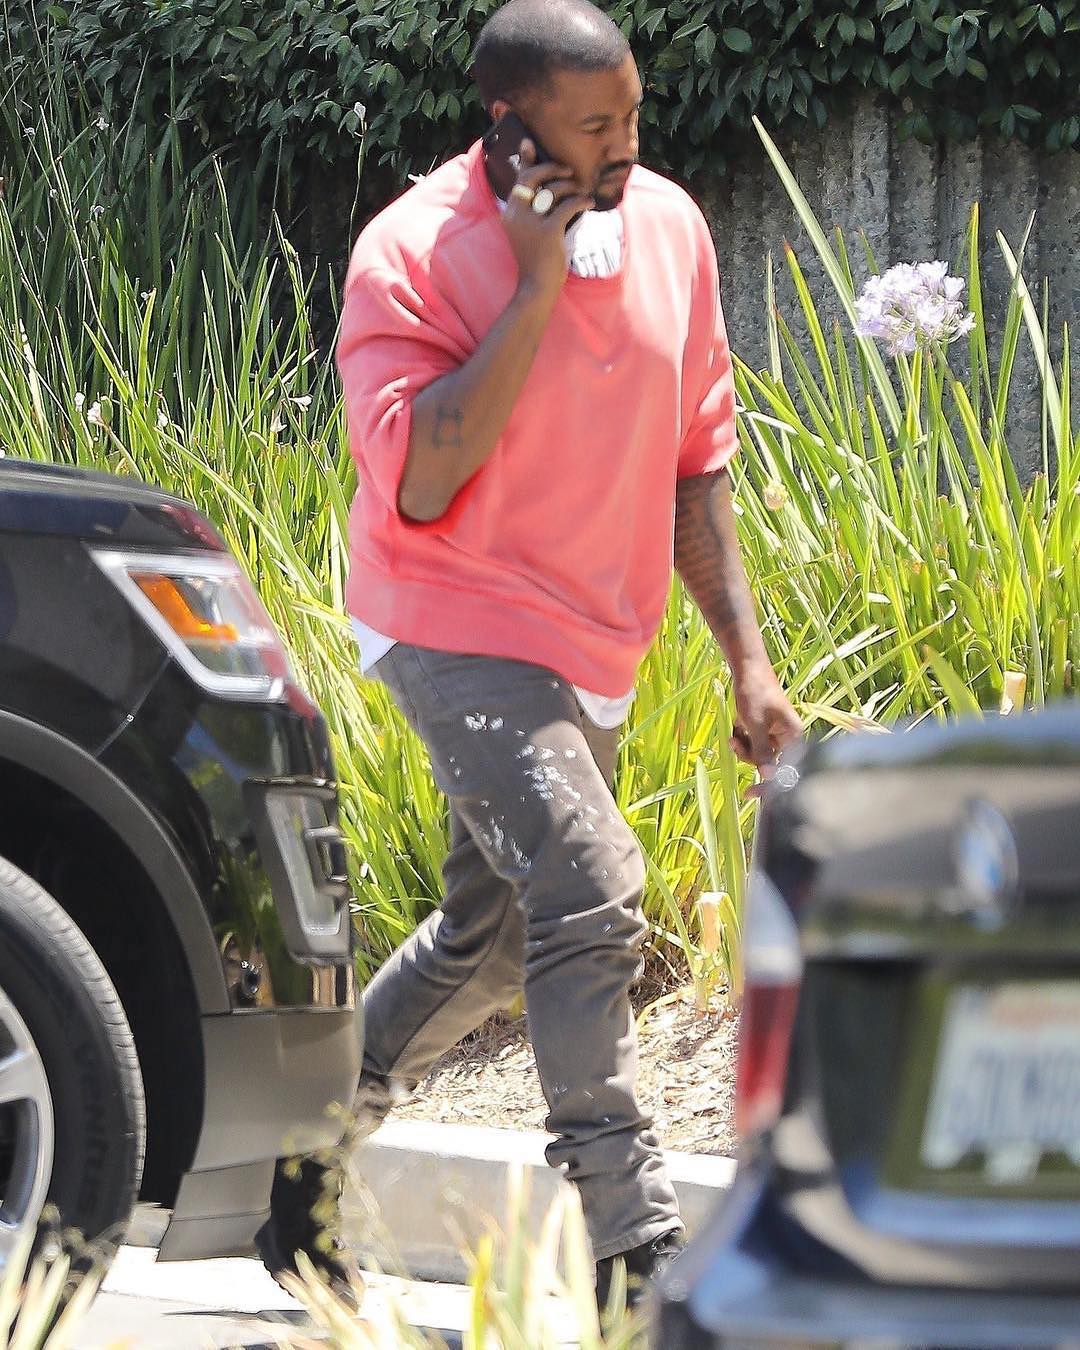 SPOTTED: Kanye West wearing vintage Helmut Lang jeans and Yeezy Season boots